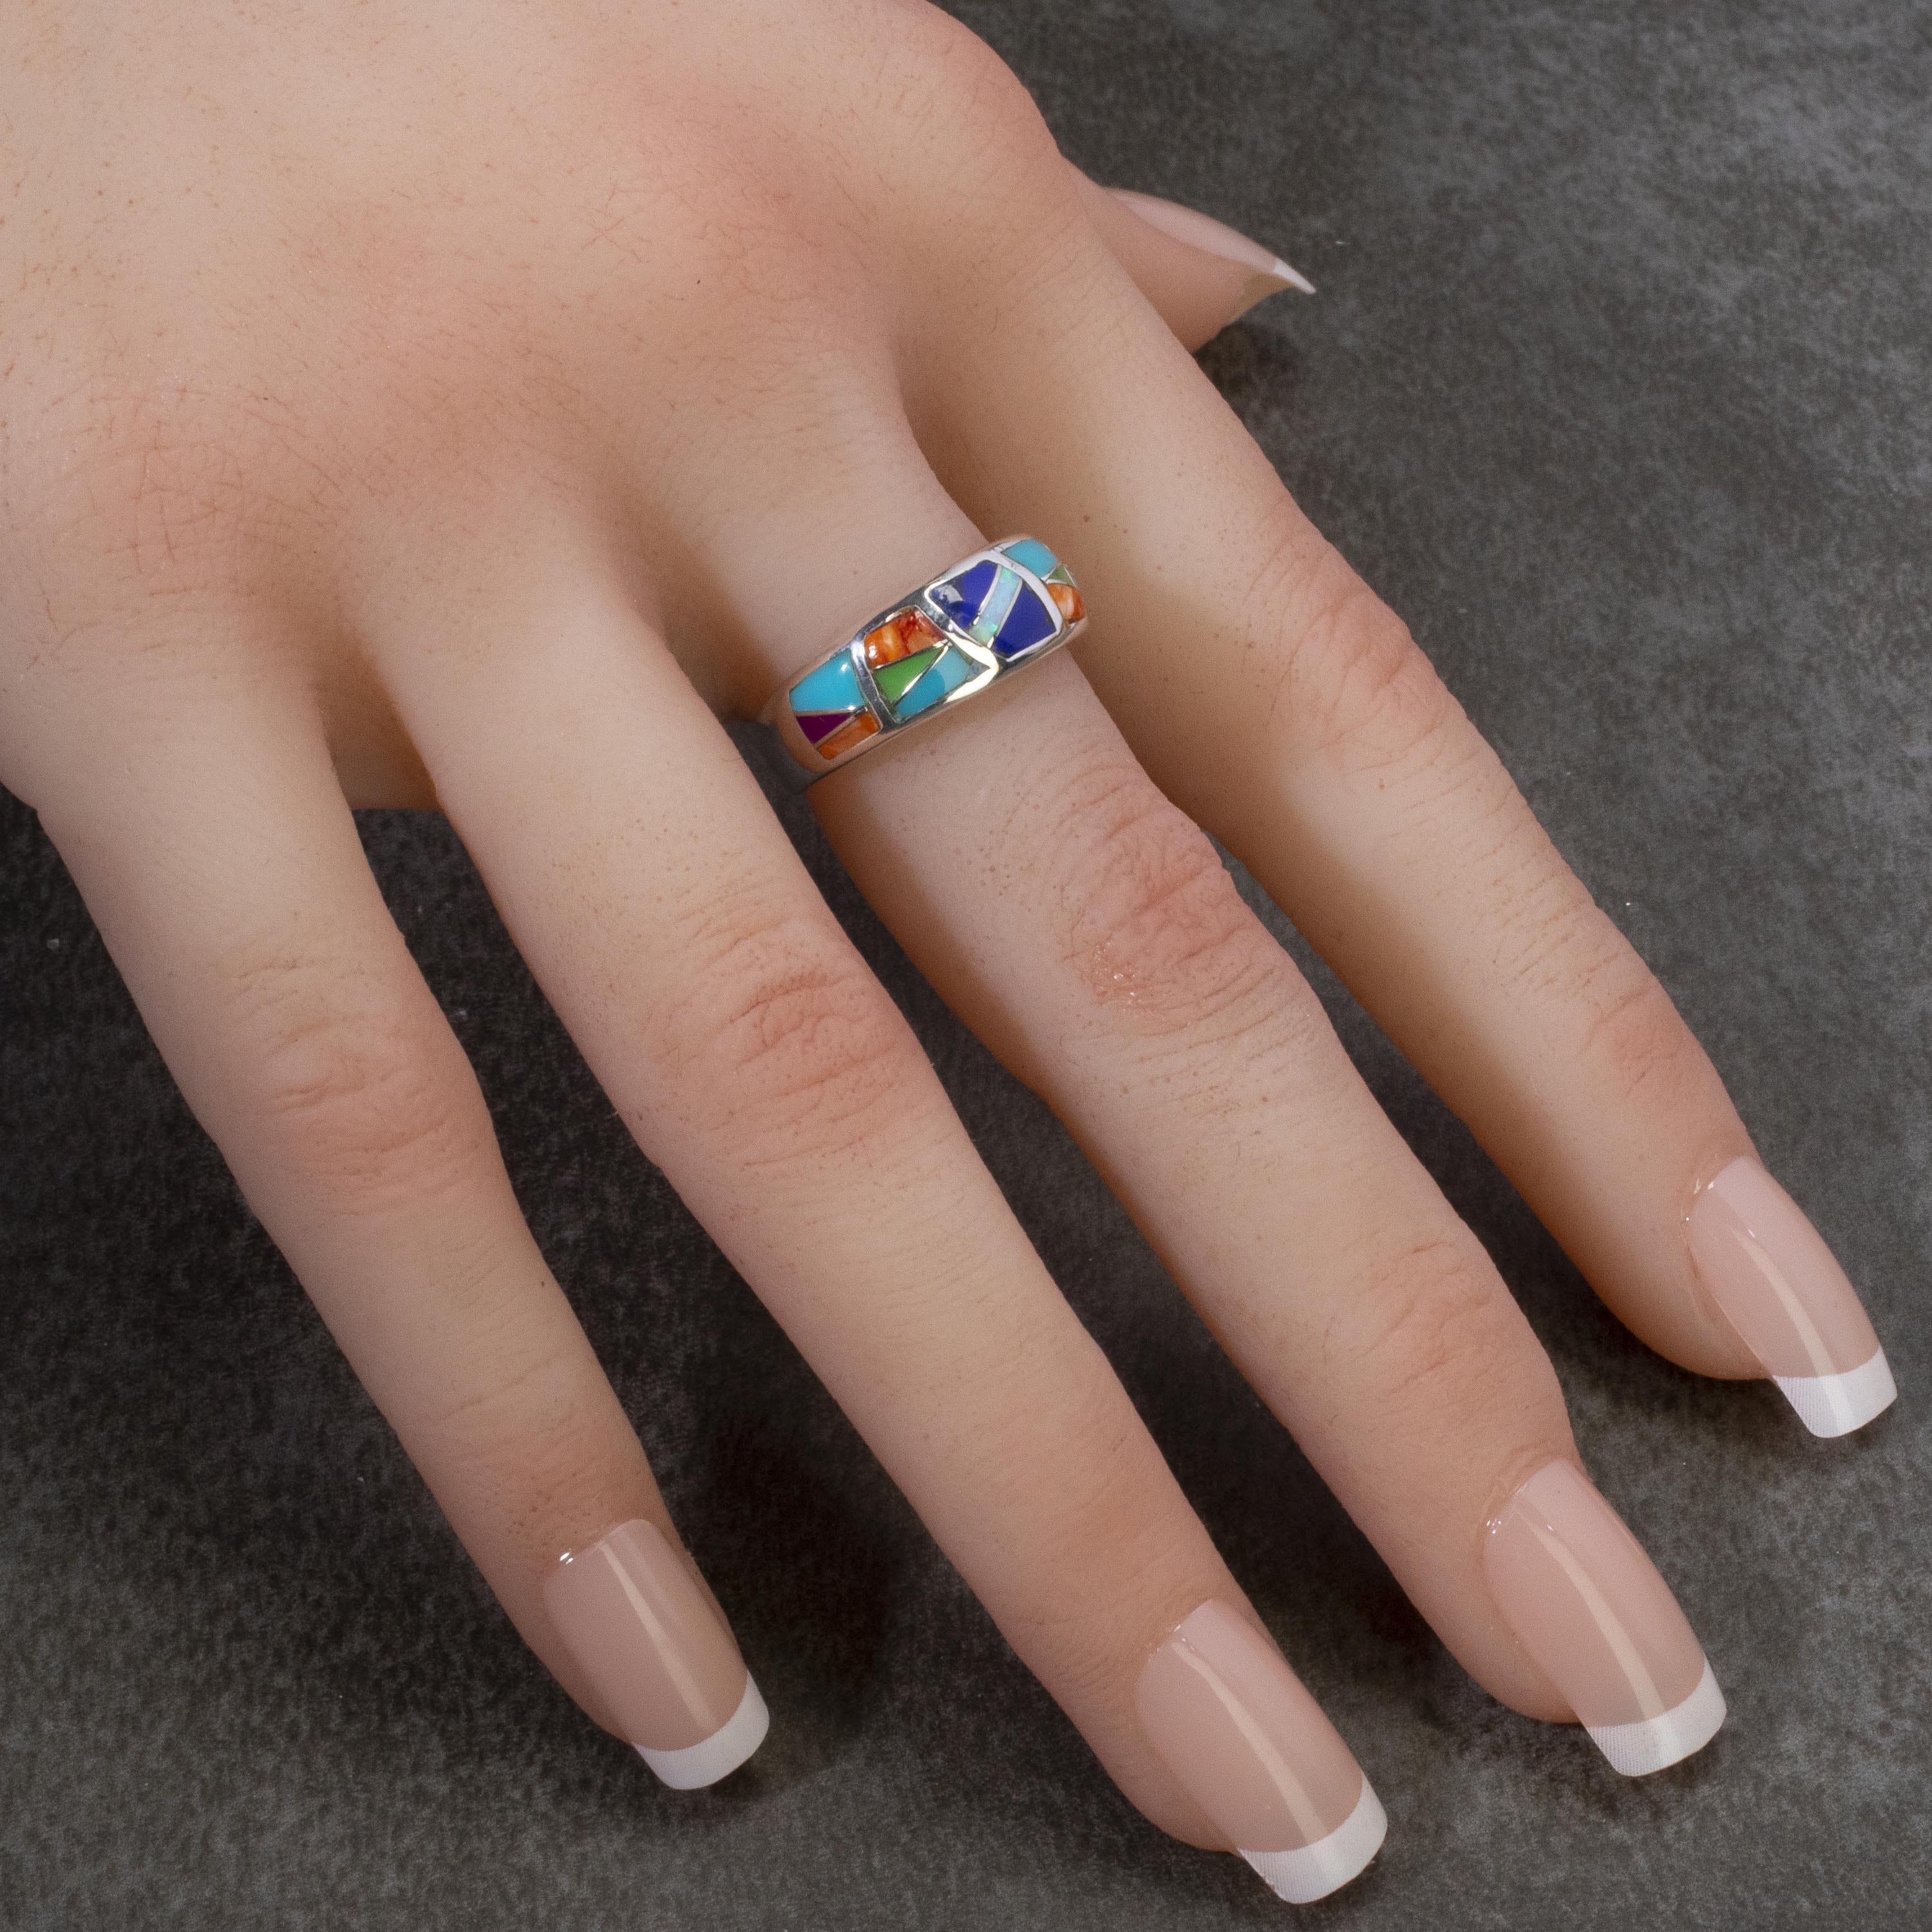 Kalifano Southwest Silver Jewelry Multi Gemstone 925 Sterling Silver Ring Handmade with Laboratory Opal Accent